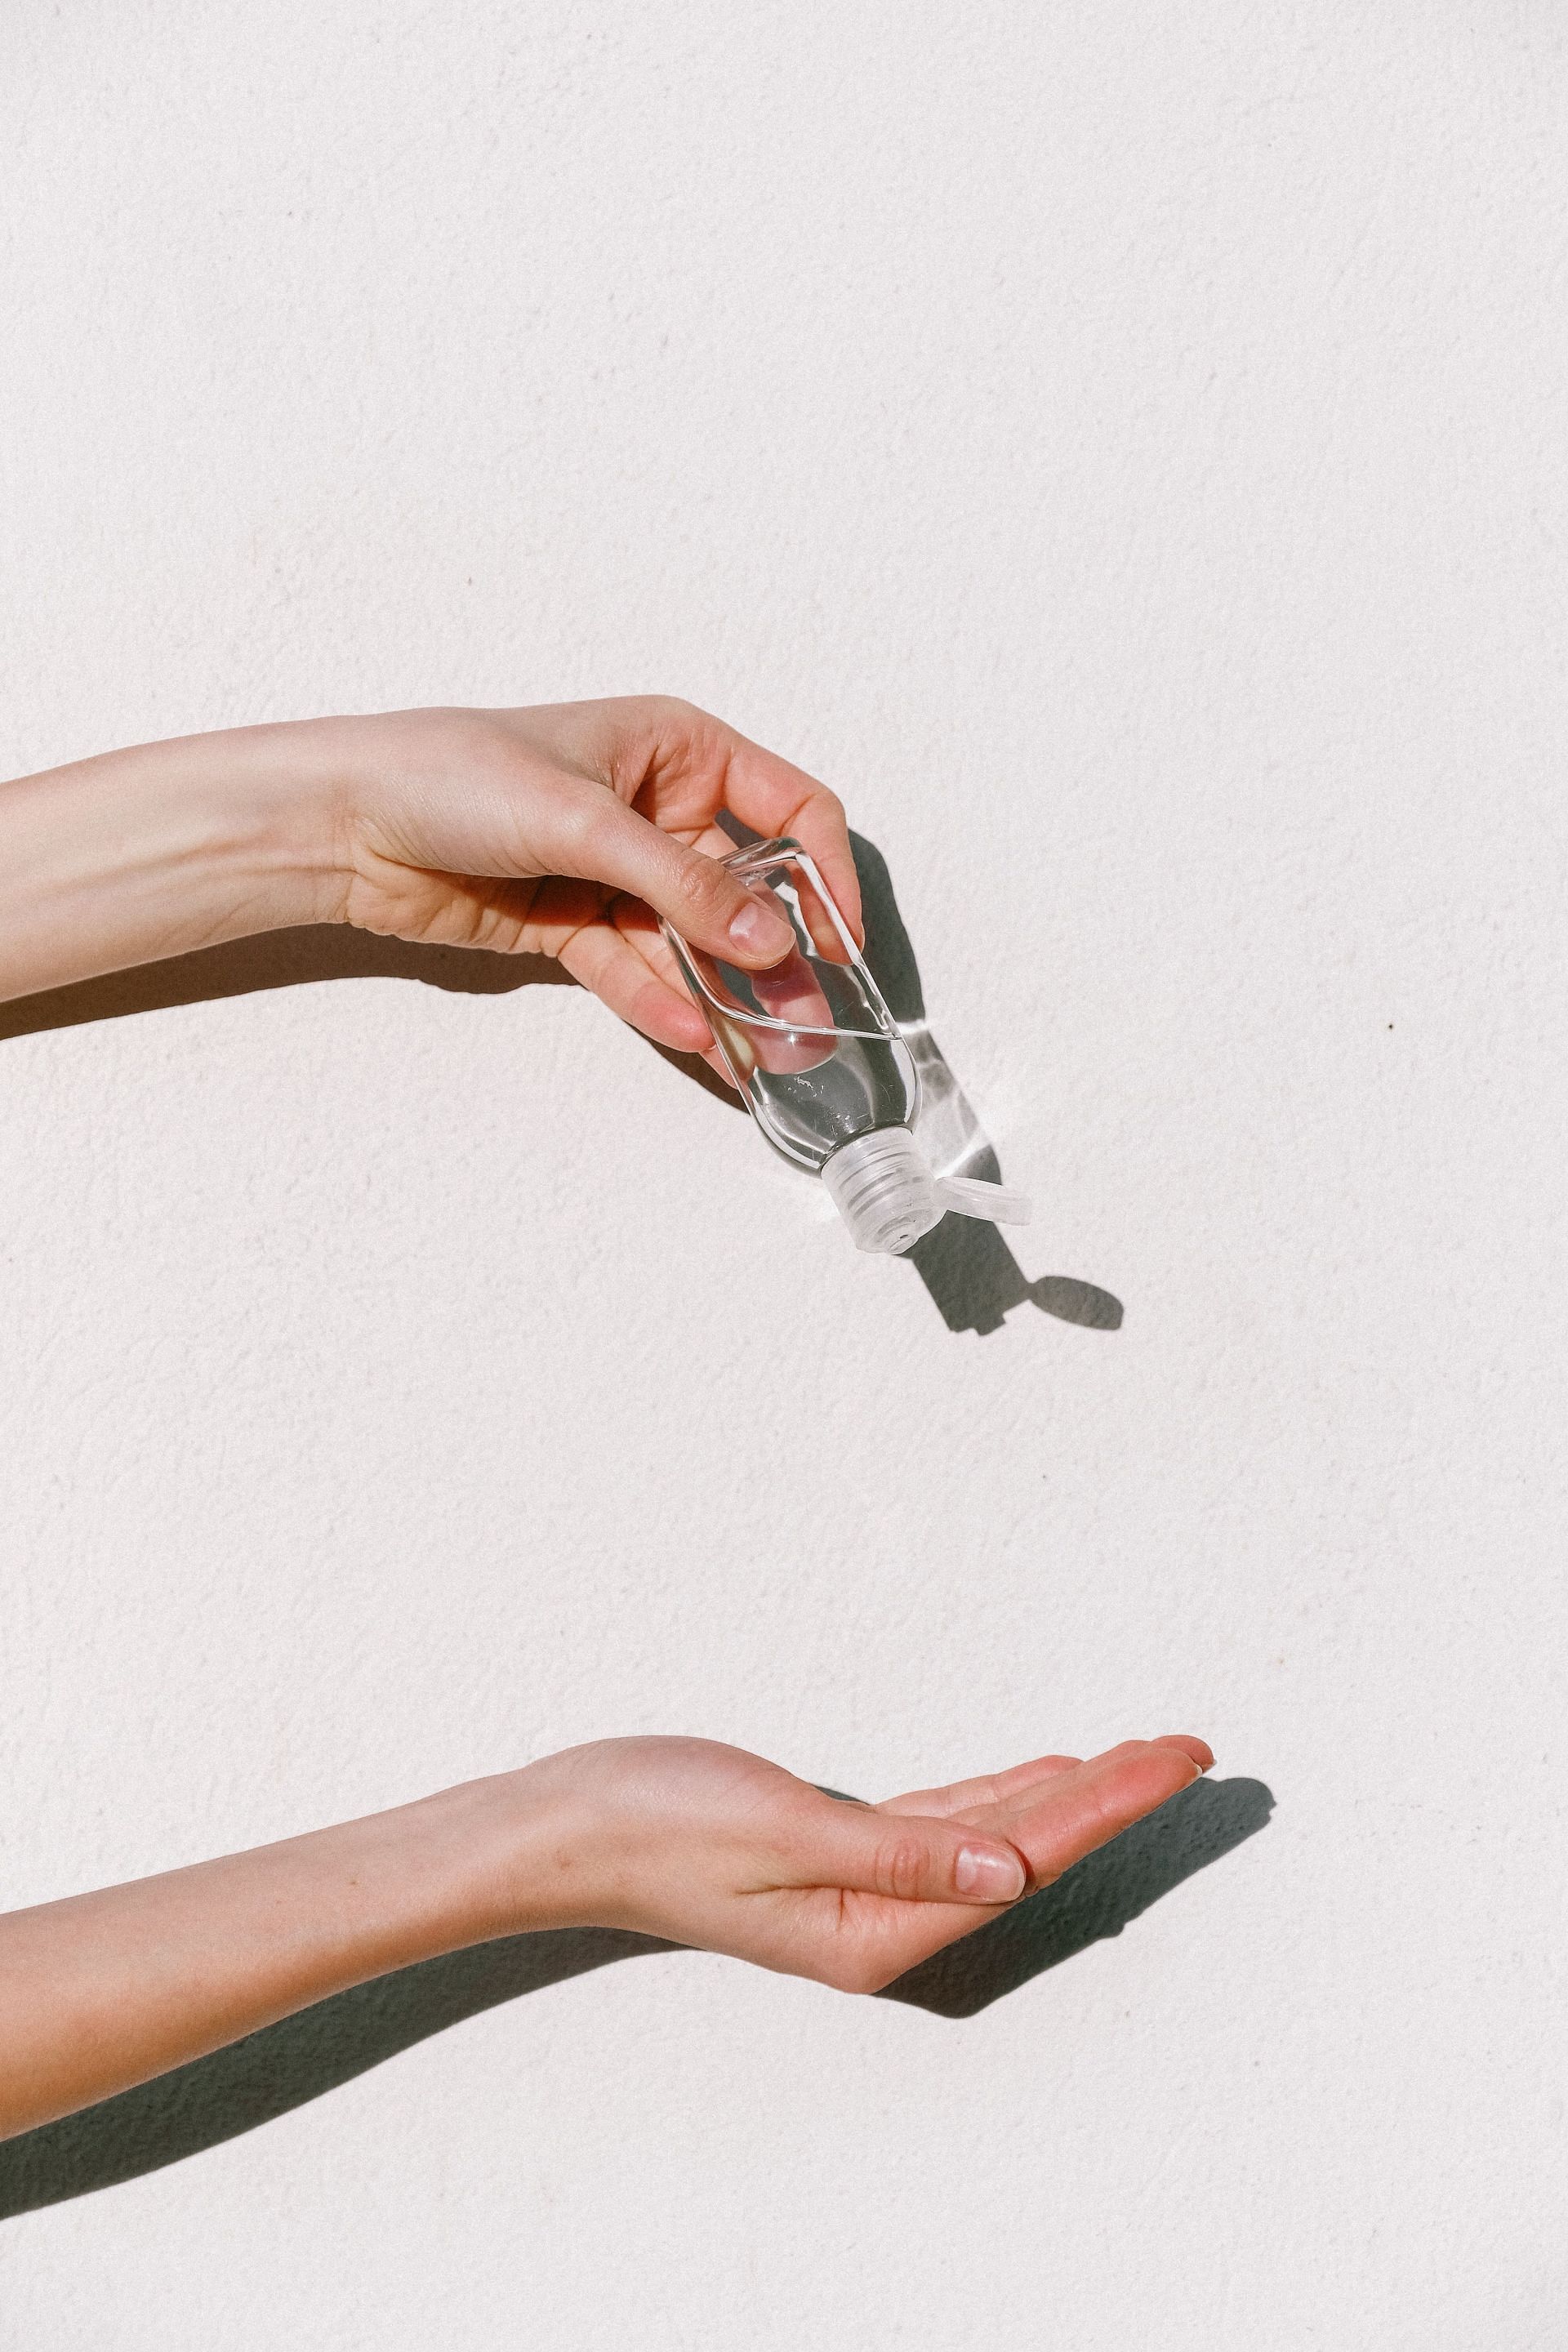 The hidden dangers of fragrances in hand sanitizers: Why natural options are better. (Image via Pexels)